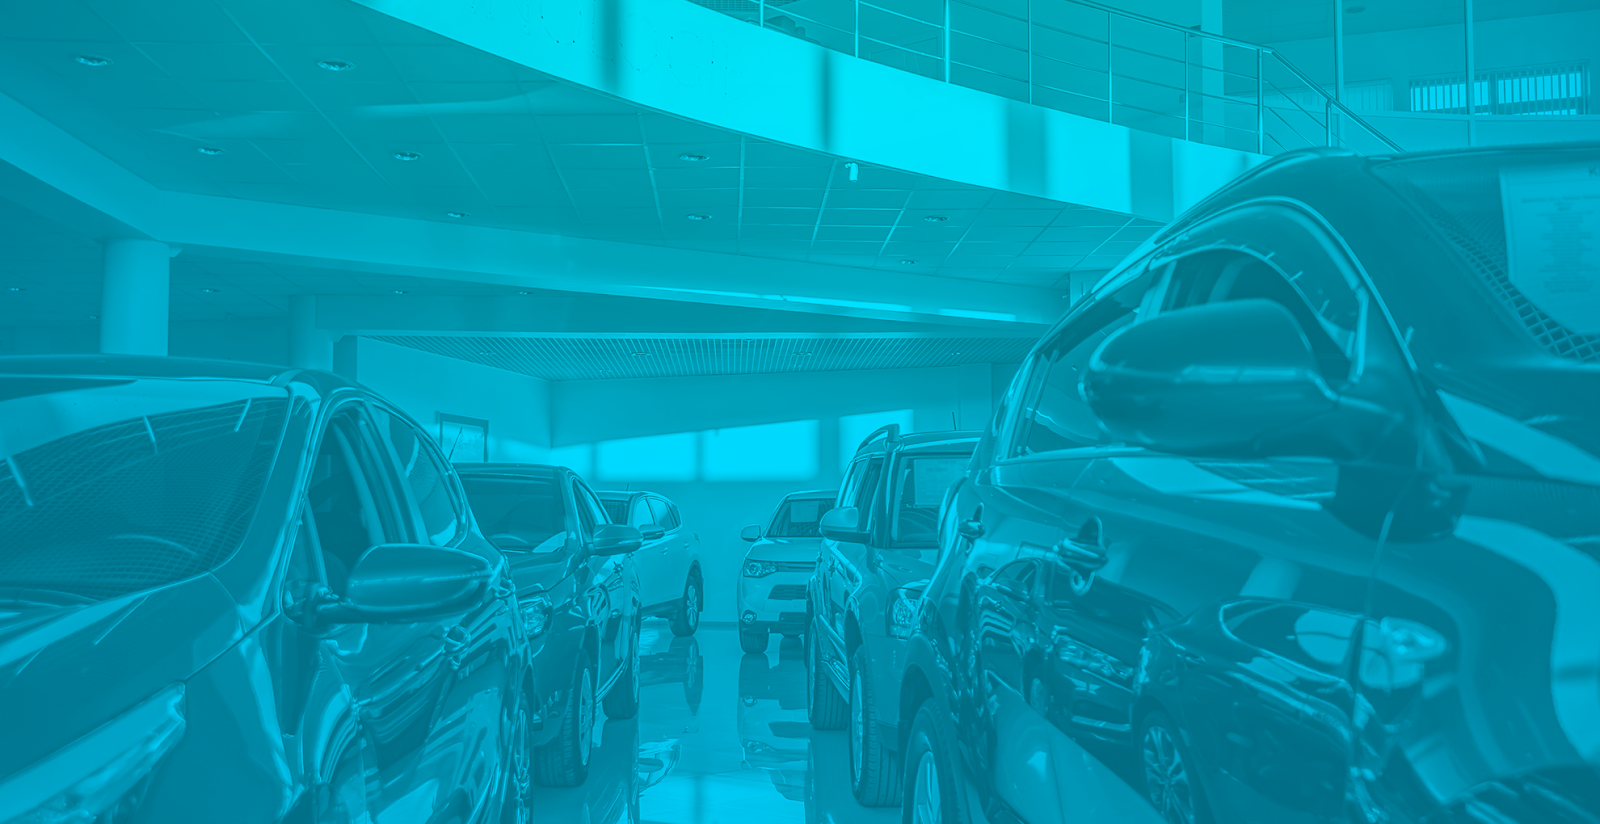 Image showing rows of cars in a showroom with blue lighting, highlighting sleek automotive design.